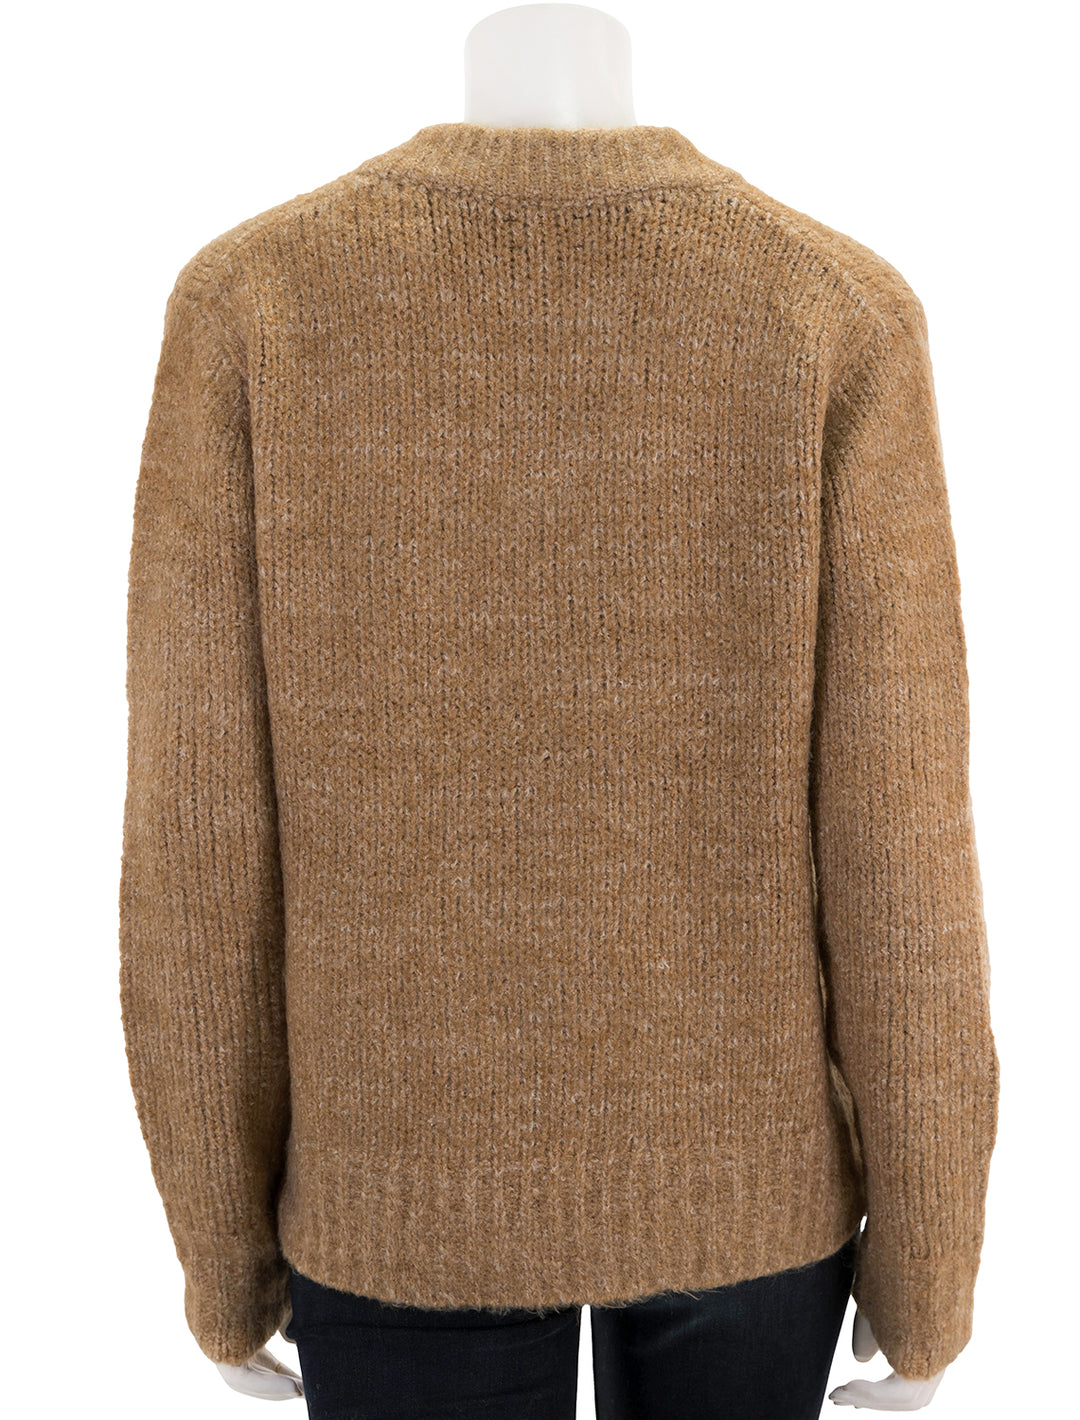 Back view of Line's Helena Sweater in Toffee.